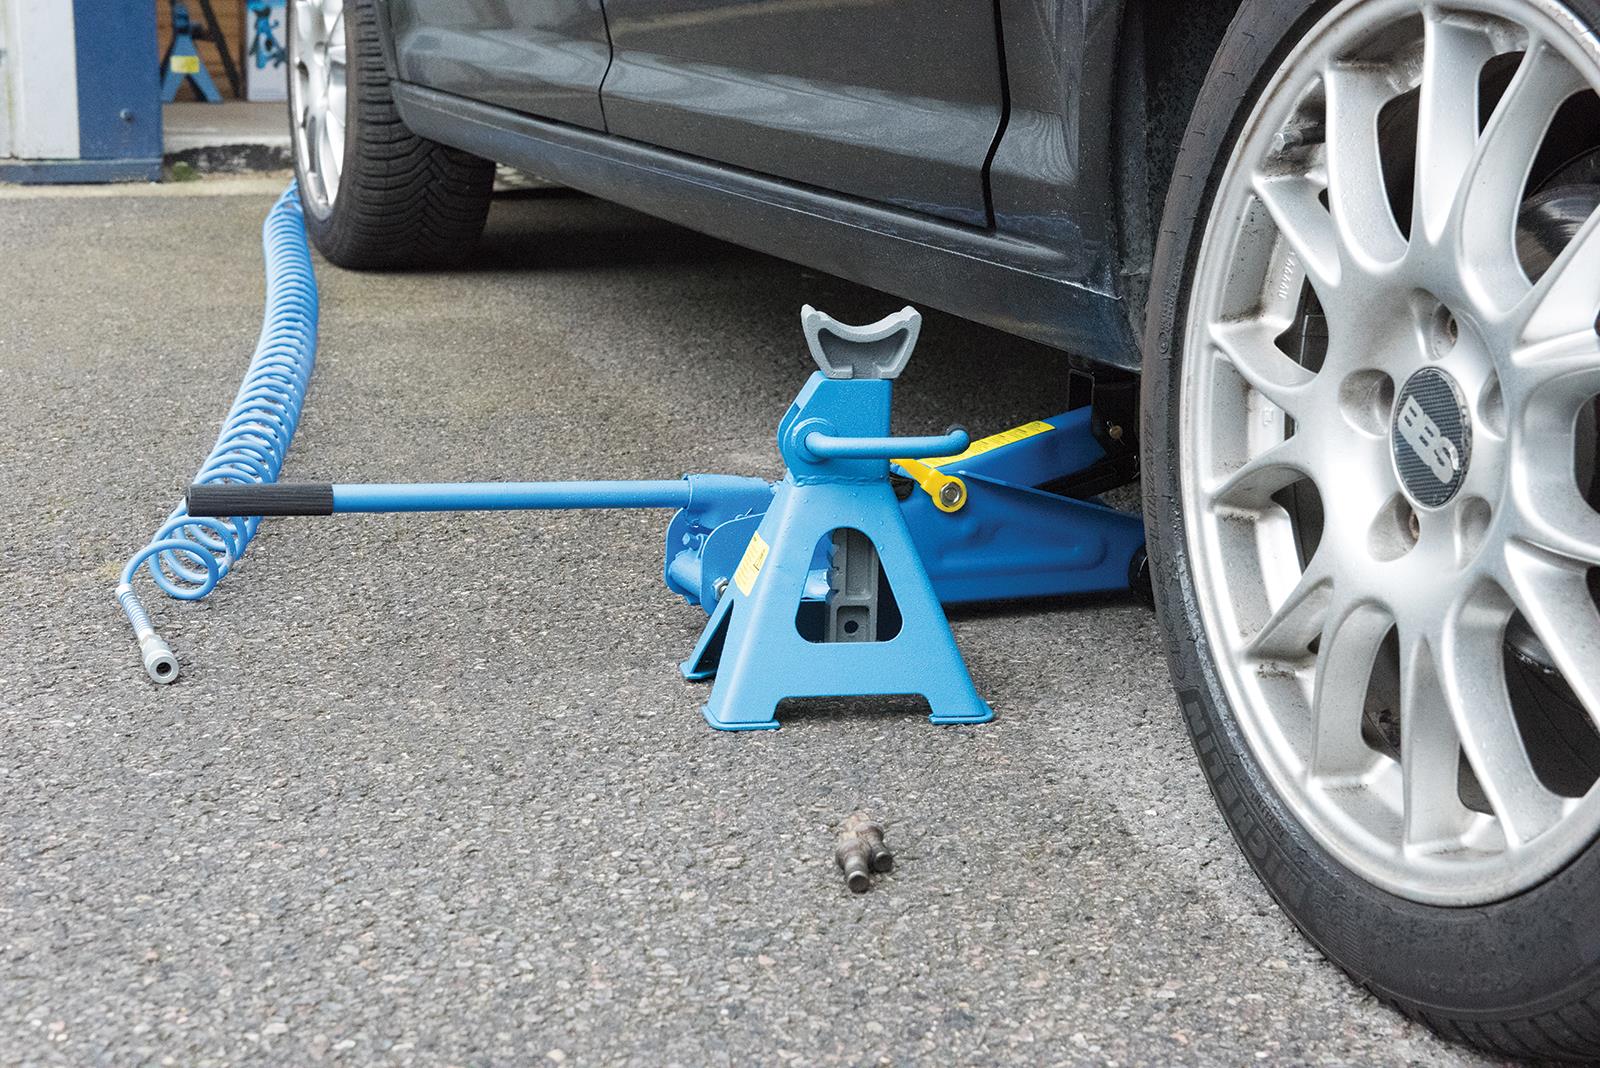 Silverline Axle Stand Set 2 Piece 3 Tonne Lifting Capacity